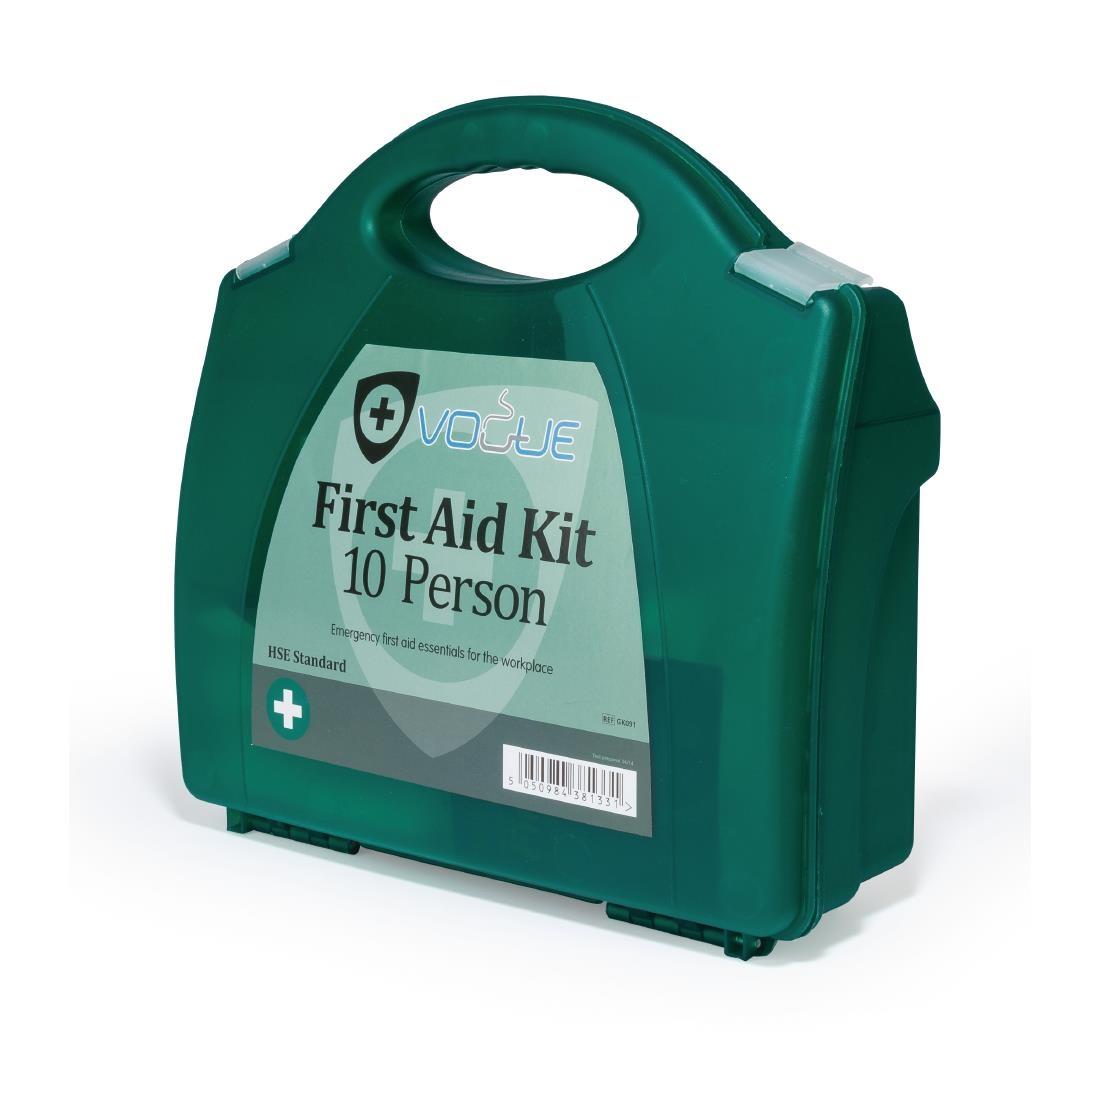 Vogue HSE First Aid Kit 10 person - GK091  - 2